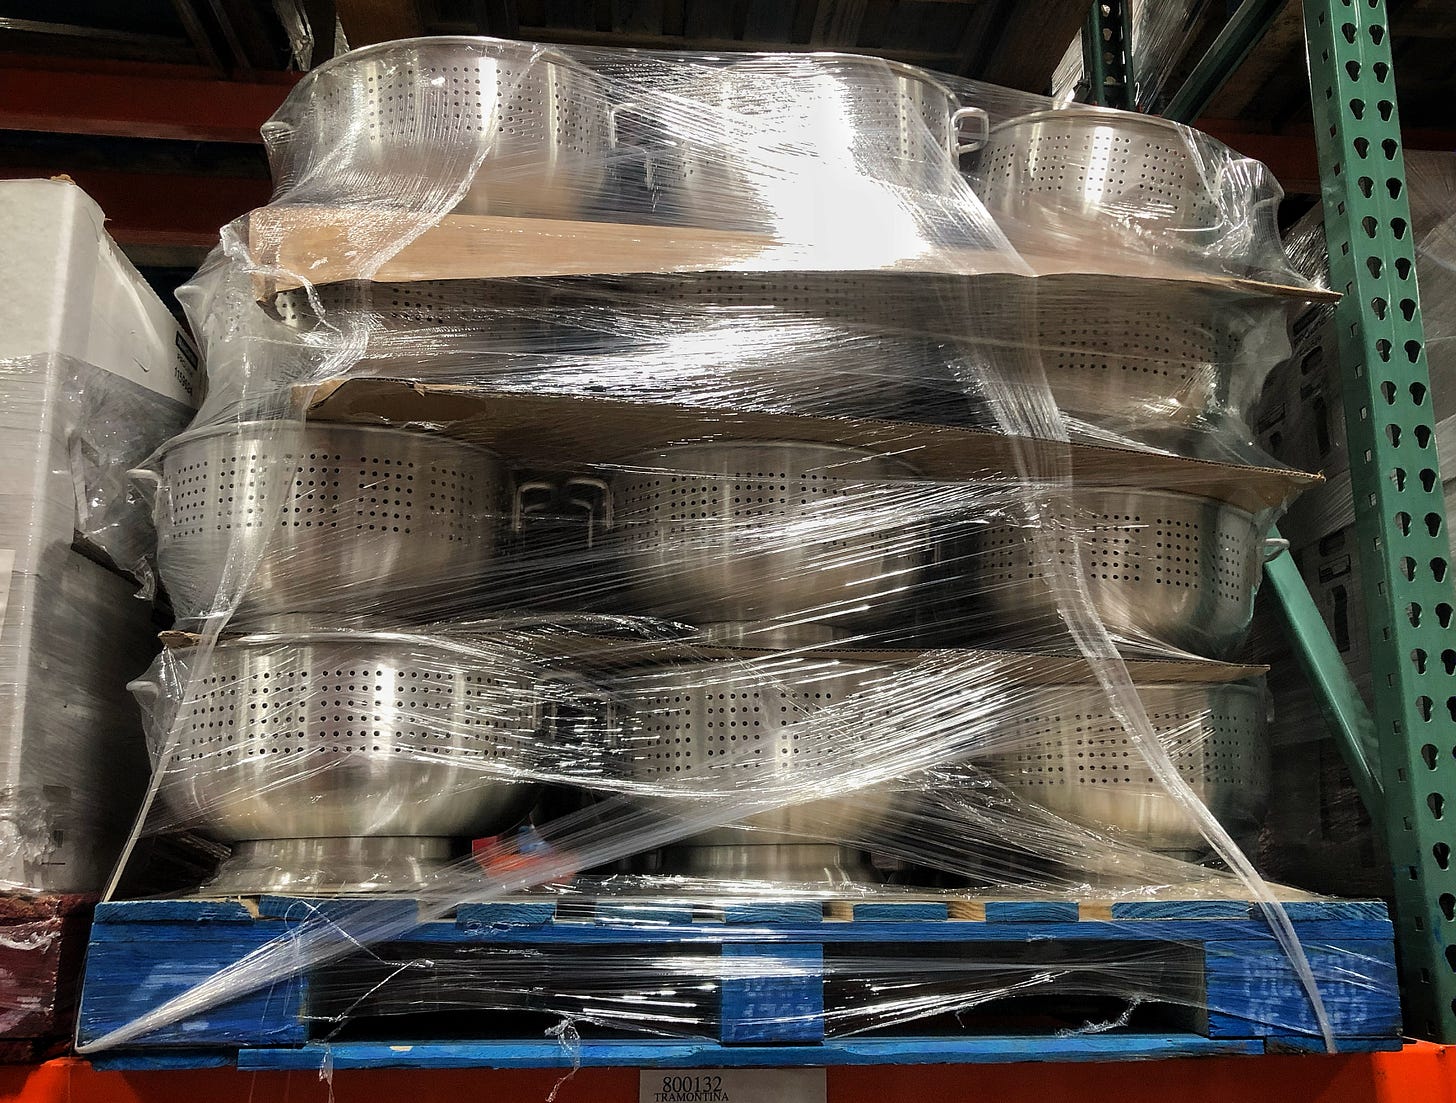 A pallet of very large, shrink-wrapped colanders on a high shelf at the Costco Business Centre